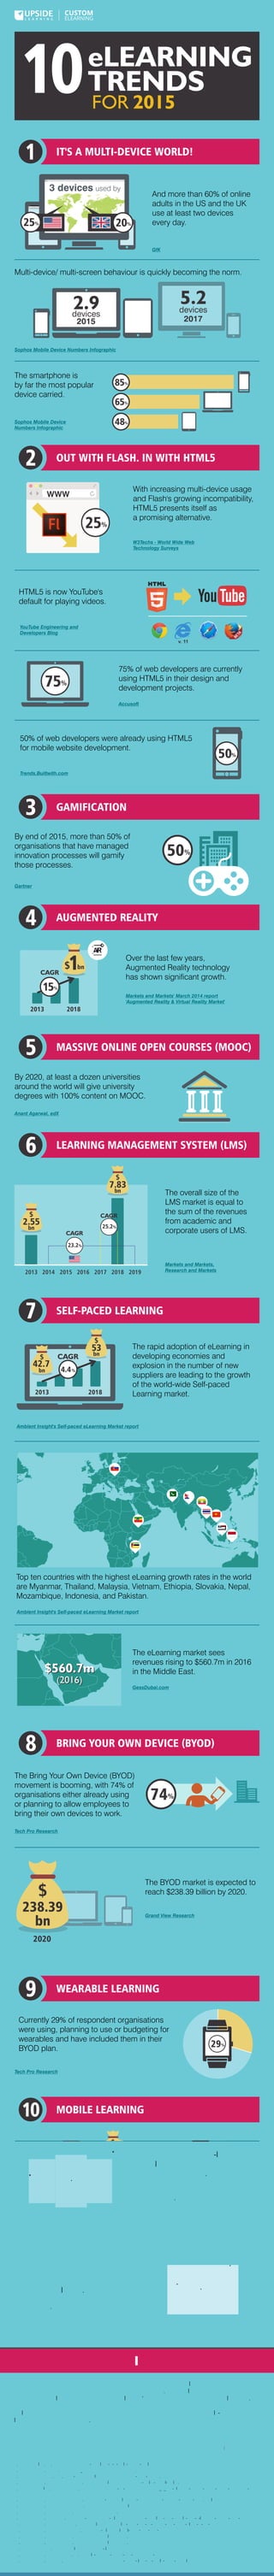 10eLEARNING
TRENDS
FOR 2015
IT'S A MULTI-DEVICE WORLD!
SUMMING UP
Organisations are adapting/ continuing to adopt eLearning, currently at a rate of 13% per year
(a pace that is projected to stay consistent through 2017). 2015 holds the promise for
expansion of online training both from the learner's perspective and organisational context.
To learn how your organisation can benefit from eLearning/ mLearning or multi-device
learning, get in touch with us.
1. http://blog.gfk.com/2014/03/finding-simplicity-in-a-multi-device-world/
2. http://www.pcmag.com/image_popup/0,1740,iid=371072,00.asp
3. http://dotgroup.com.br/wp-content/uploads/2014/04/Gartner-2020-Trends.pdf
4. http://www.marketsandmarkets.com/PressReleases/augmented-reality-virtual-reality.asp
5. http://articles.economictimes.indiatimes.com/2015-01-16/news/58149756_1_edx-platform-moocs-indian-higher-education-
system
6. http://www.marketsandmarkets.com/Market-Reports/learning-management-systems-market-1266.html
7. http://www.researchandmarkets.com/research/3m6wpn/learning
8. http://www.ambientinsight.com/Reports/eLearning.aspx
9. http://www.gessdubai.com/news-center/press-releases/education-suppliers-turn-middle-east-e-learning-market-sees-revenues
10. http://www.techproresearch.com/downloads/wearables-byod-and-iot-current-and-future-plans-in-the-enterprise/
11. http://www.grandviewresearch.com/press-release/global-bring-your-own-device
12. http://www.ambientinsight.com/Reports/MobileLearning.aspx#section1
13. http://www.ambientinsight.com/Reports/MobileLearning.aspx#section3
14. http://w3techs.com/technologies/report/cp-flash
15. http://www.designbysoap.co.uk/html5-benefits-usage-and-predictions-infographic/
16. http://www.theverge.com/2015/1/27/7926001/youtube-drops-flash-for-html5-video-default
References
Infographic by
www.upsidelearning.com/custom
And more than 60% of online
adults in the US and the UK
use at least two devices
every day.
1
Multi-device/ multi-screen behaviour is quickly becoming the norm.
The smartphone is
by far the most popular
device carried.
Sophos Mobile Device Numbers Infographic
Sophos Mobile Device
Numbers Infographic
OUT WITH FLASH. IN WITH HTML52
With increasing multi-device usage
and Flash's growing incompatibility,
HTML5 presents itself as
a promising alternative.
W3Techs - World Wide Web
Technology Surveys
GAMIFICATION3
By end of 2015, more than 50% of
organisations that have managed
innovation processes will gamify
those processes.
Gartner
AUGMENTED REALITY4
Over the last few years,
Augmented Reality technology
has shown significant growth.
Markets and Markets' March 2014 report
'Augmented Reality & Virtual Reality Market'
GfK
MASSIVE ONLINE OPEN COURSES (MOOC)5
By 2020, at least a dozen universities
around the world will give university
degrees with 100% content on MOOC.
Anant Agarwal, edX
LEARNING MANAGEMENT SYSTEM (LMS)6
SELF-PACED LEARNING7
The rapid adoption of eLearning in
developing economies and
explosion in the number of new
suppliers are leading to the growth
of the world-wide Self-paced
Learning market.
Ambient Insight's Self-paced eLearning Market report
Top ten countries with the highest eLearning growth rates in the world
are Myanmar, Thailand, Malaysia, Vietnam, Ethiopia, Slovakia, Nepal,
Mozambique, Indonesia, and Pakistan.
Ambient Insight's Self-paced eLearning Market report
BRING YOUR OWN DEVICE (BYOD)8
WEARABLE LEARNING9
MOBILE LEARNING10
The eLearning market sees
revenues rising to $560.7m in 2016
in the Middle East.
GessDubai.com
$560.7m
(2016)
$560.7m
(2016)
The Bring Your Own Device (BYOD)
movement is booming, with 74% of
organisations either already using
or planning to allow employees to
bring their own devices to work.
Tech Pro Research
Currently 29% of respondent organisations
were using, planning to use or budgeting for
wearables and have included them in their
BYOD plan.
Tech Pro Research
China was the second-largest
Mobile Learning buying country
after the US in 2014.
Ambient Insight's 2013-2018 North
America Mobile Edugame Market research
The number of
new edugames coming
to the North American
market is exploding.
Ambient Insight's 2013-2018 North
America Mobile Edugame Market research
2014 2019
HTML5 is now YouTube's
default for playing videos.
75% of web developers are currently
using HTML5 in their design and
development projects.
Accusoft
50% of web developers were already using HTML5
for mobile website development.
Trends.Builtwith.com
YouTube Engineering and
Developers Blog
5.22.9devices
2015
devices
2017
The BYOD market is expected to
reach $238.39 billion by 2020.
Grand View Research
85%
65%
48%
25% 20%
50%
74%
2018
$1bn
CAGR
2013 2014 2015 2016 2017 2018 2019
$
2.55
bn
$
7.83
bn
23.2%
25.2%
CAGR
The overall size of the
LMS market is equal to
the sum of the revenues
from academic and
corporate users of LMS.
Markets and Markets,
Research and Markets
20182013
CAGR
29%
$
1.1
bn
$
2.3
bn
CAGR
15.4%
20182013
CAGR$
227.9
mn
$
410.27
mn
WWW
25%
75%
50%
2013
12.5%
4.4%
CAGR
15%
$
238.39
bn
2020
$
42.7
bn
$
53
bn
v. 11
3 devices used by
 